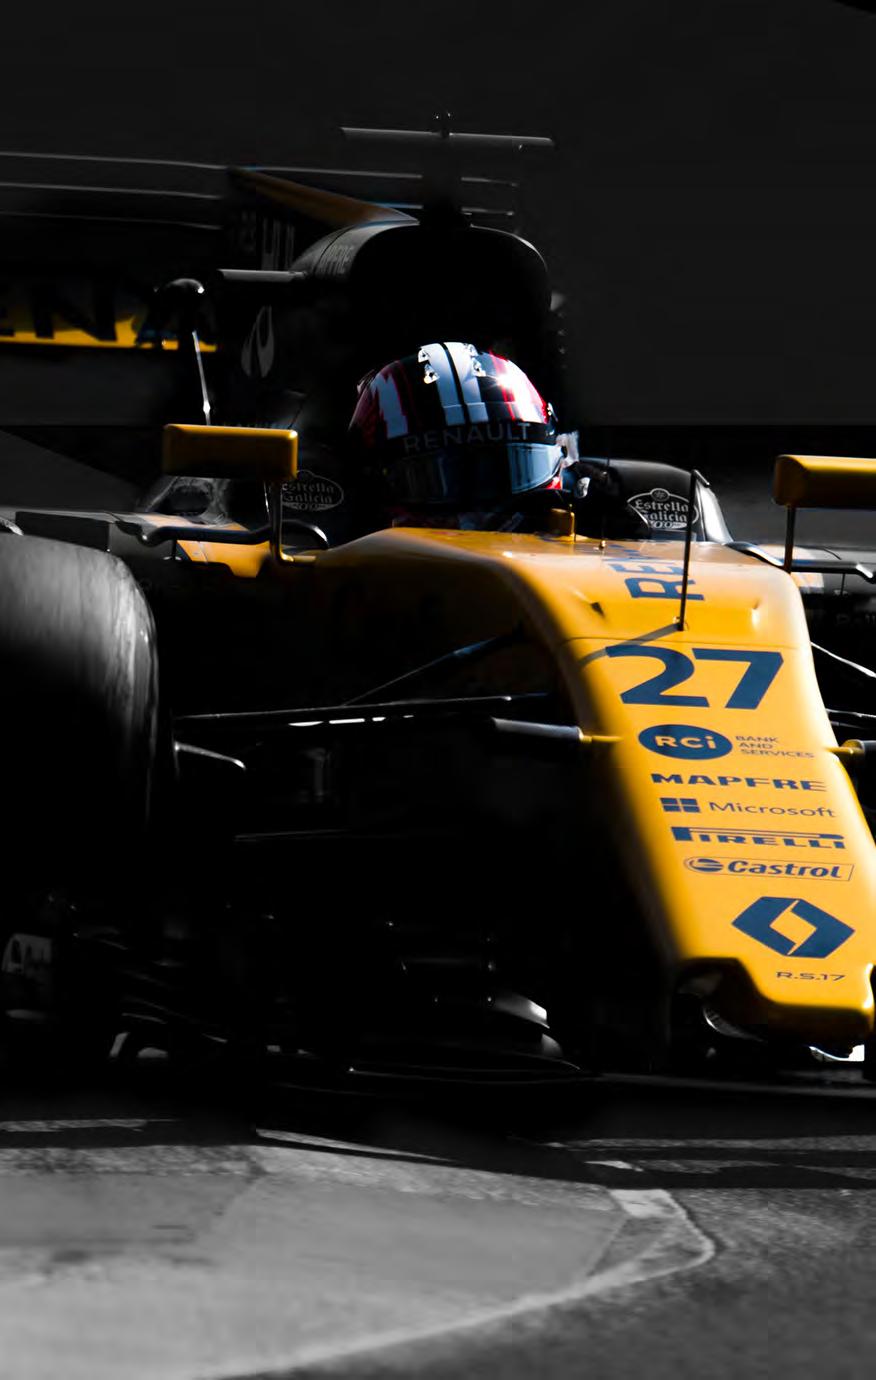 FOREWORD It is a great source of pride for Groupe Renault and its employees to see the Renault name once again working its way to the sharp end of Formula 1.